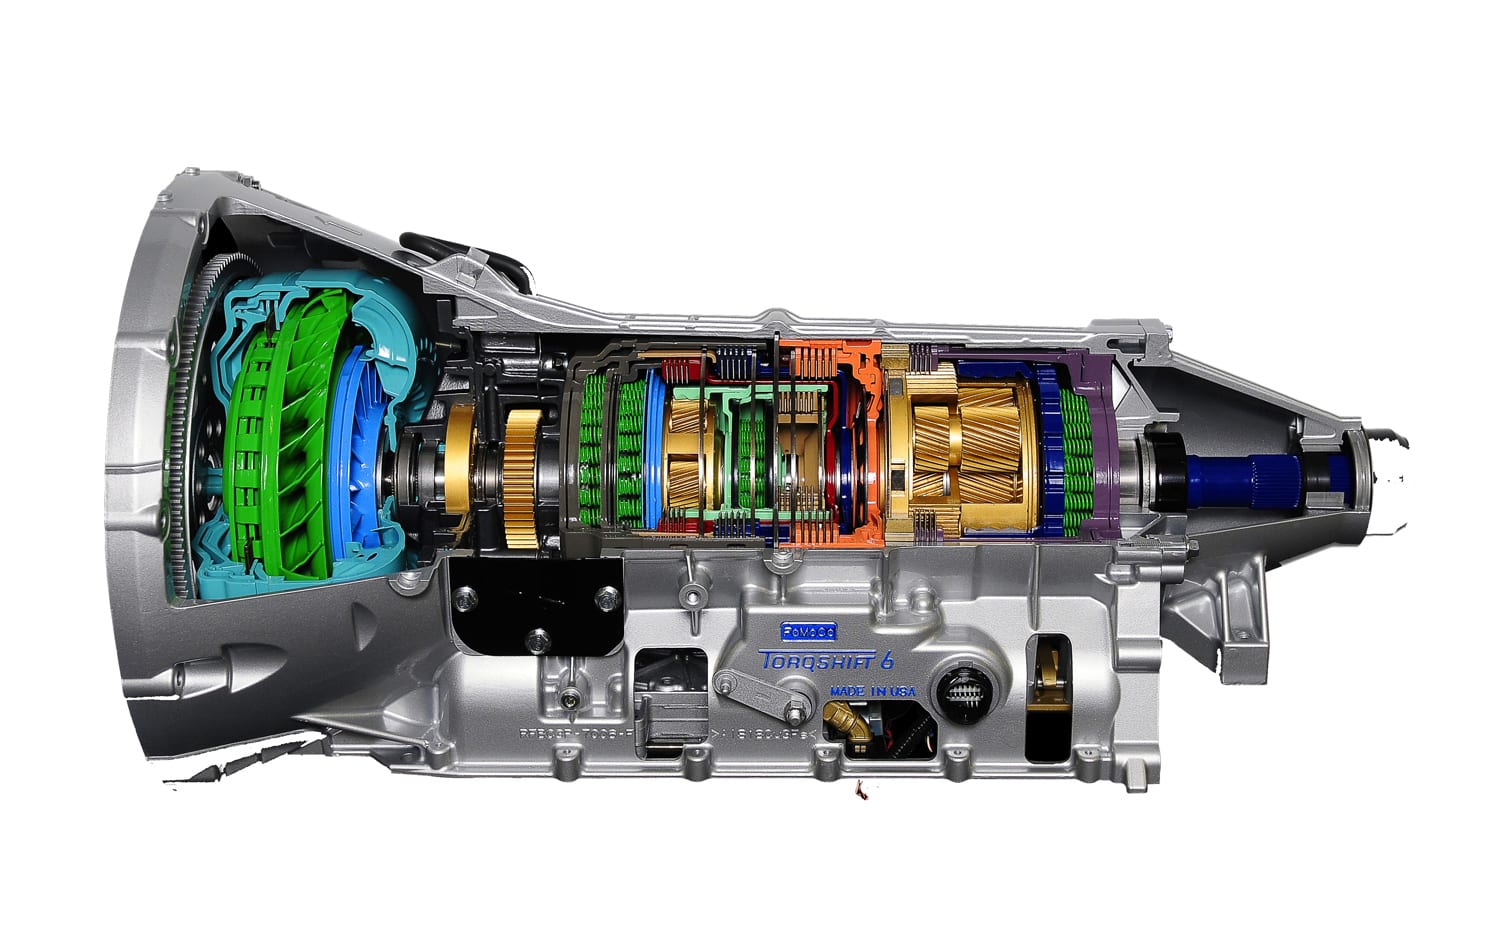 Gm And Ford Collaborated On 10 Speed Transmission That Will Be Used By Both Brands Autoinfluence